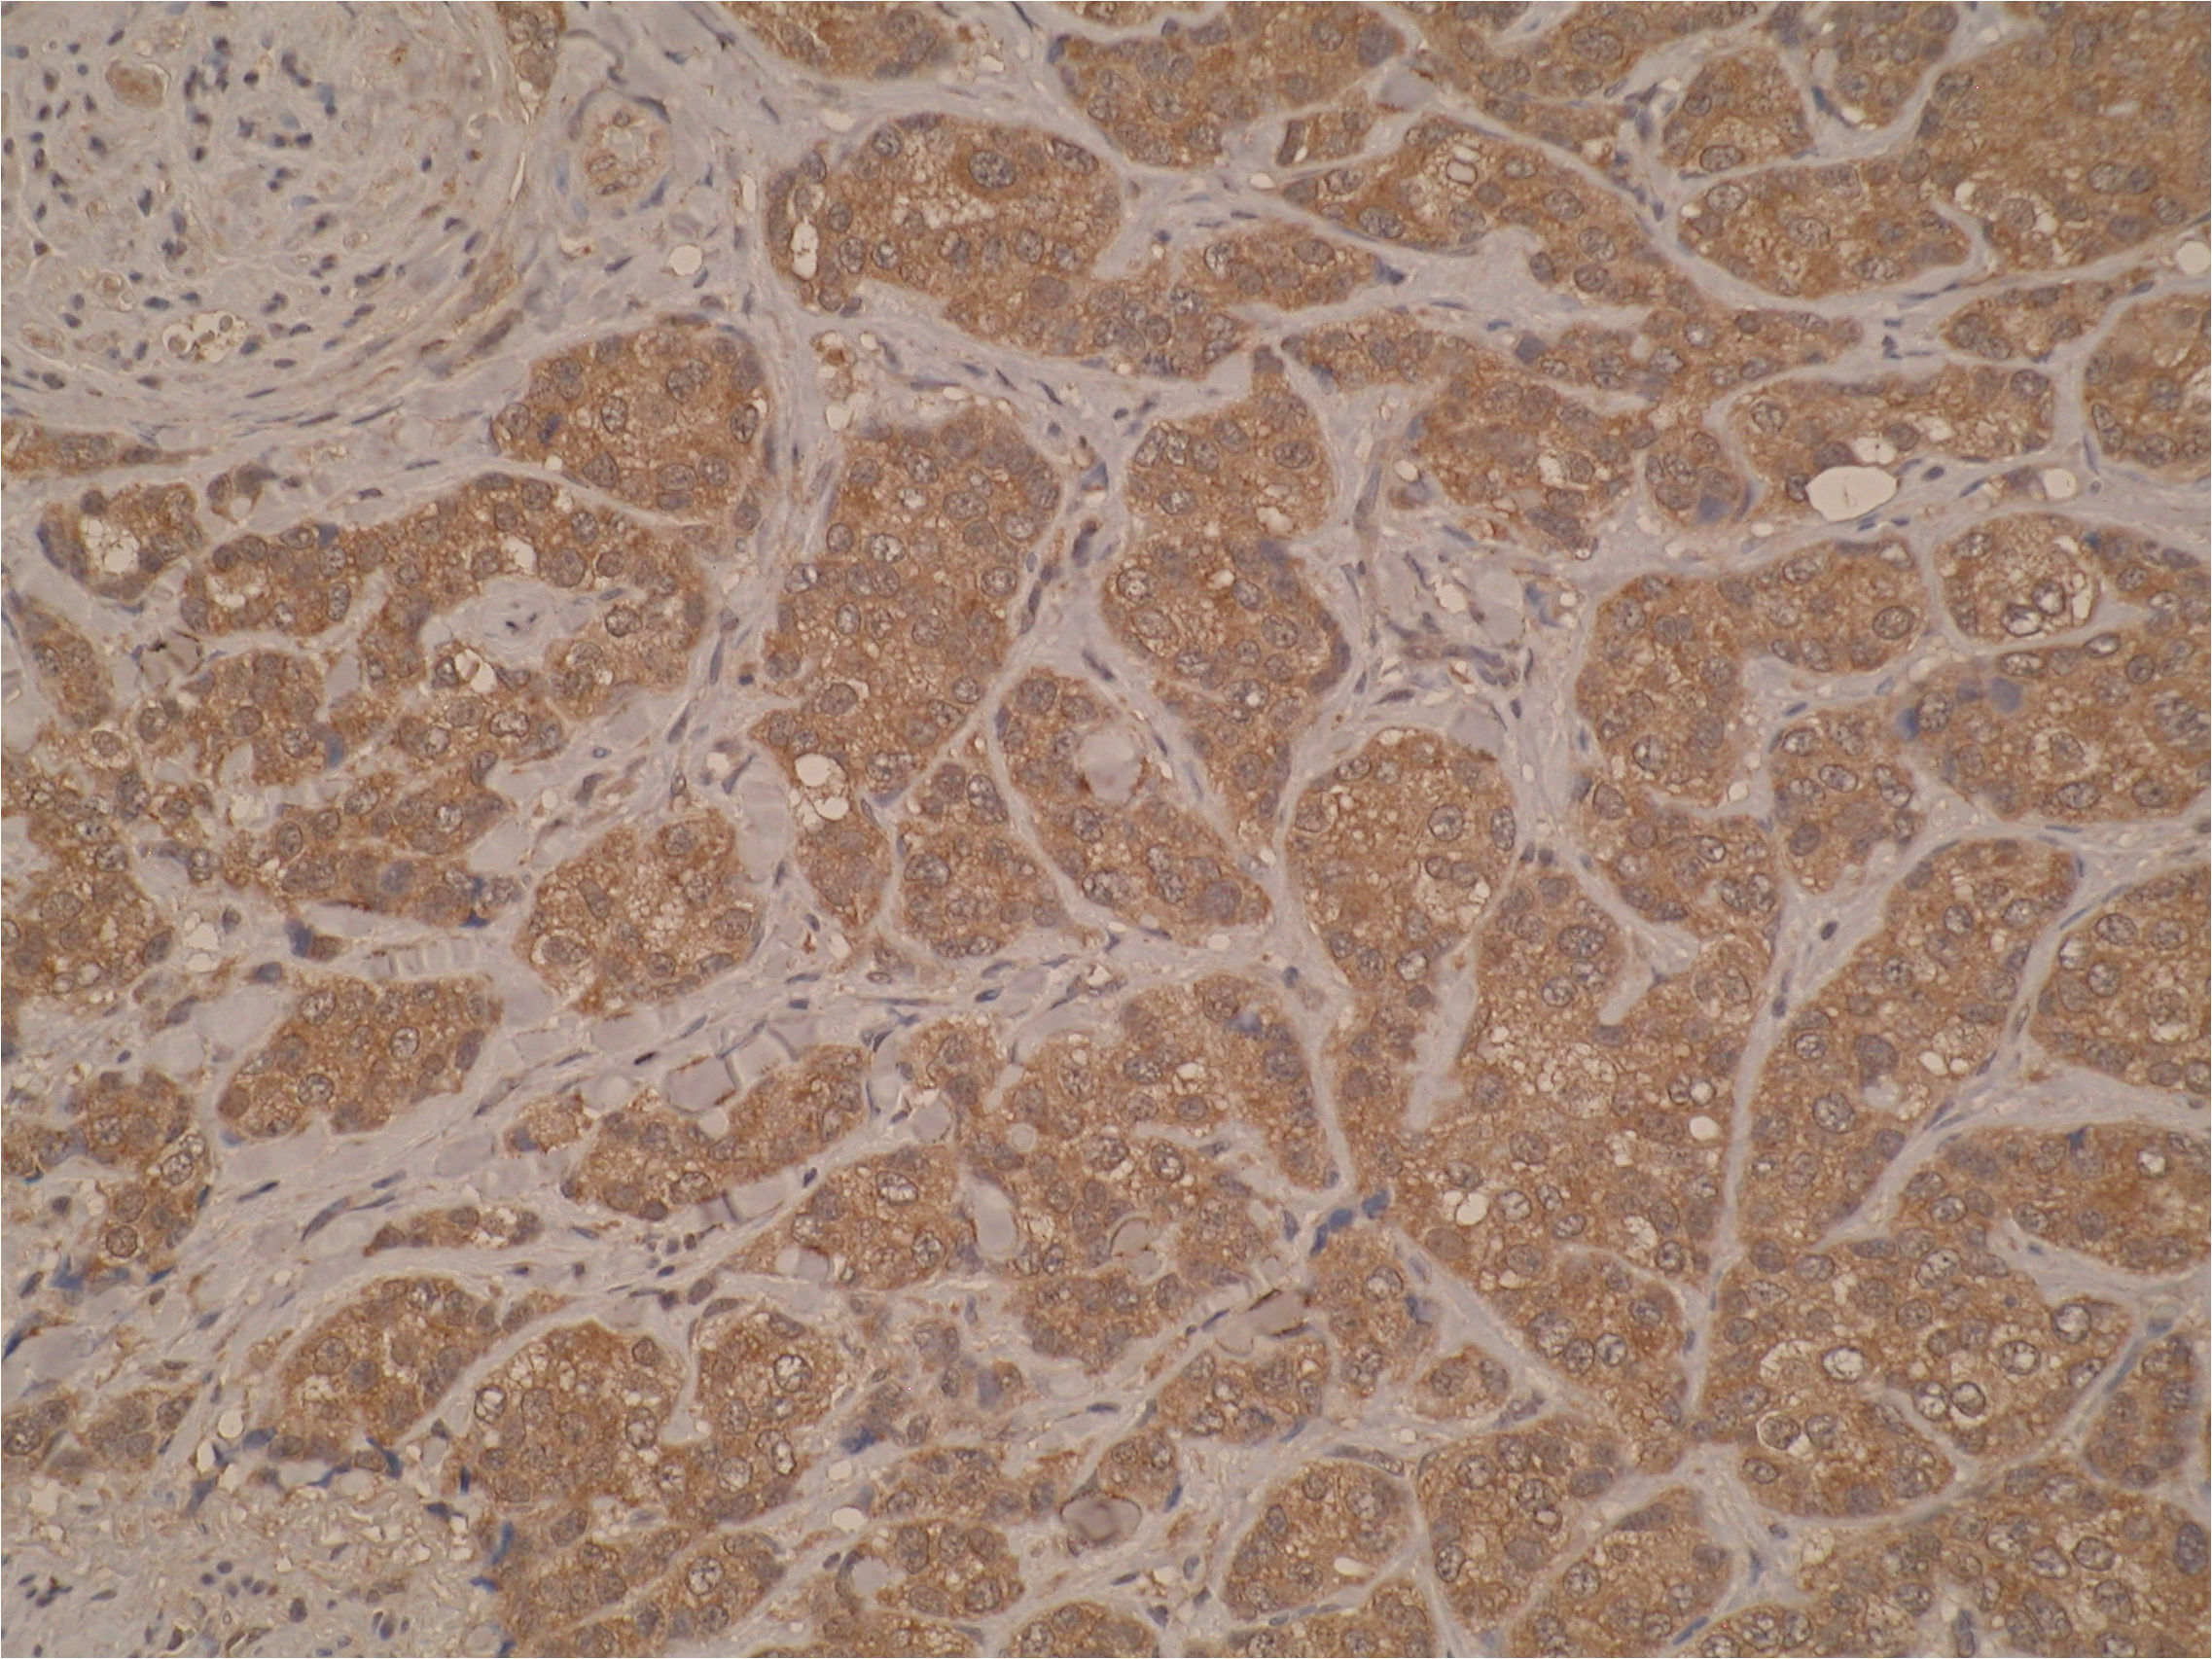 Immunohistochemistry was performed on formalin-fixed, paraffin-embedded tissue sections and showed strong cytoplasmic immunostaining in breast cancer tissue. 